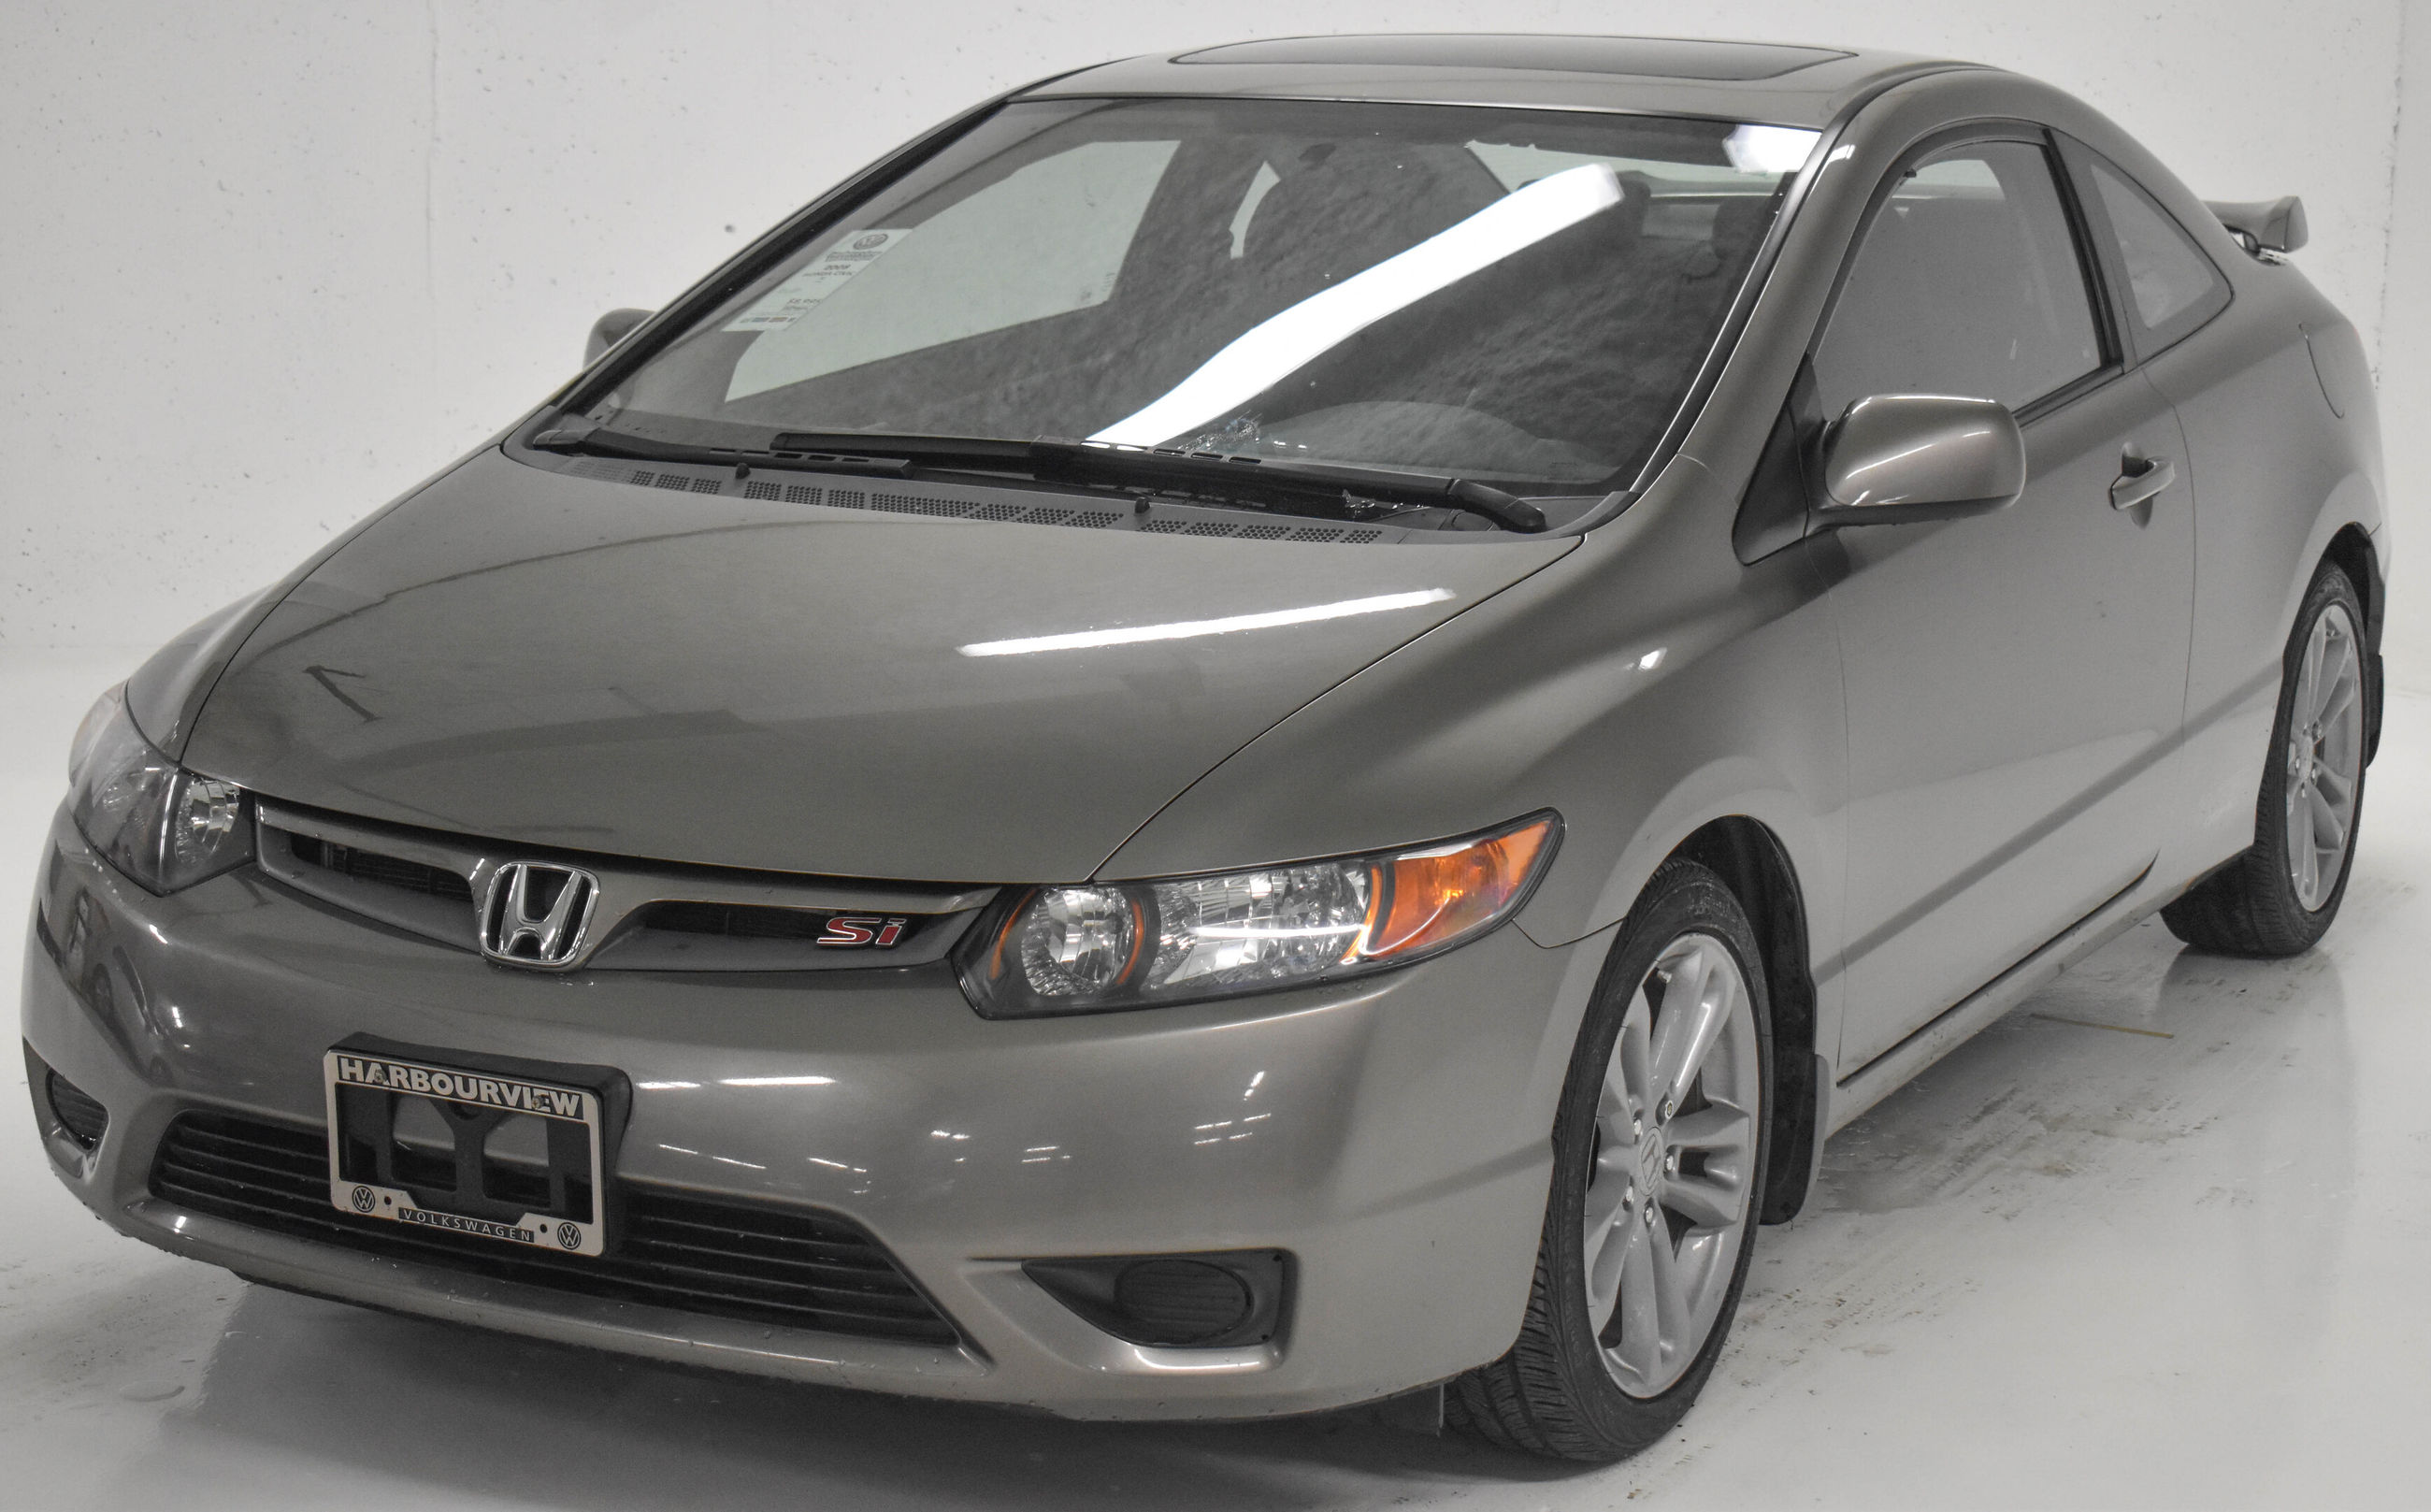 Used 2008 Honda Civic Coupe Si 6-Speed for Sale - $8776 | Harbourview VW